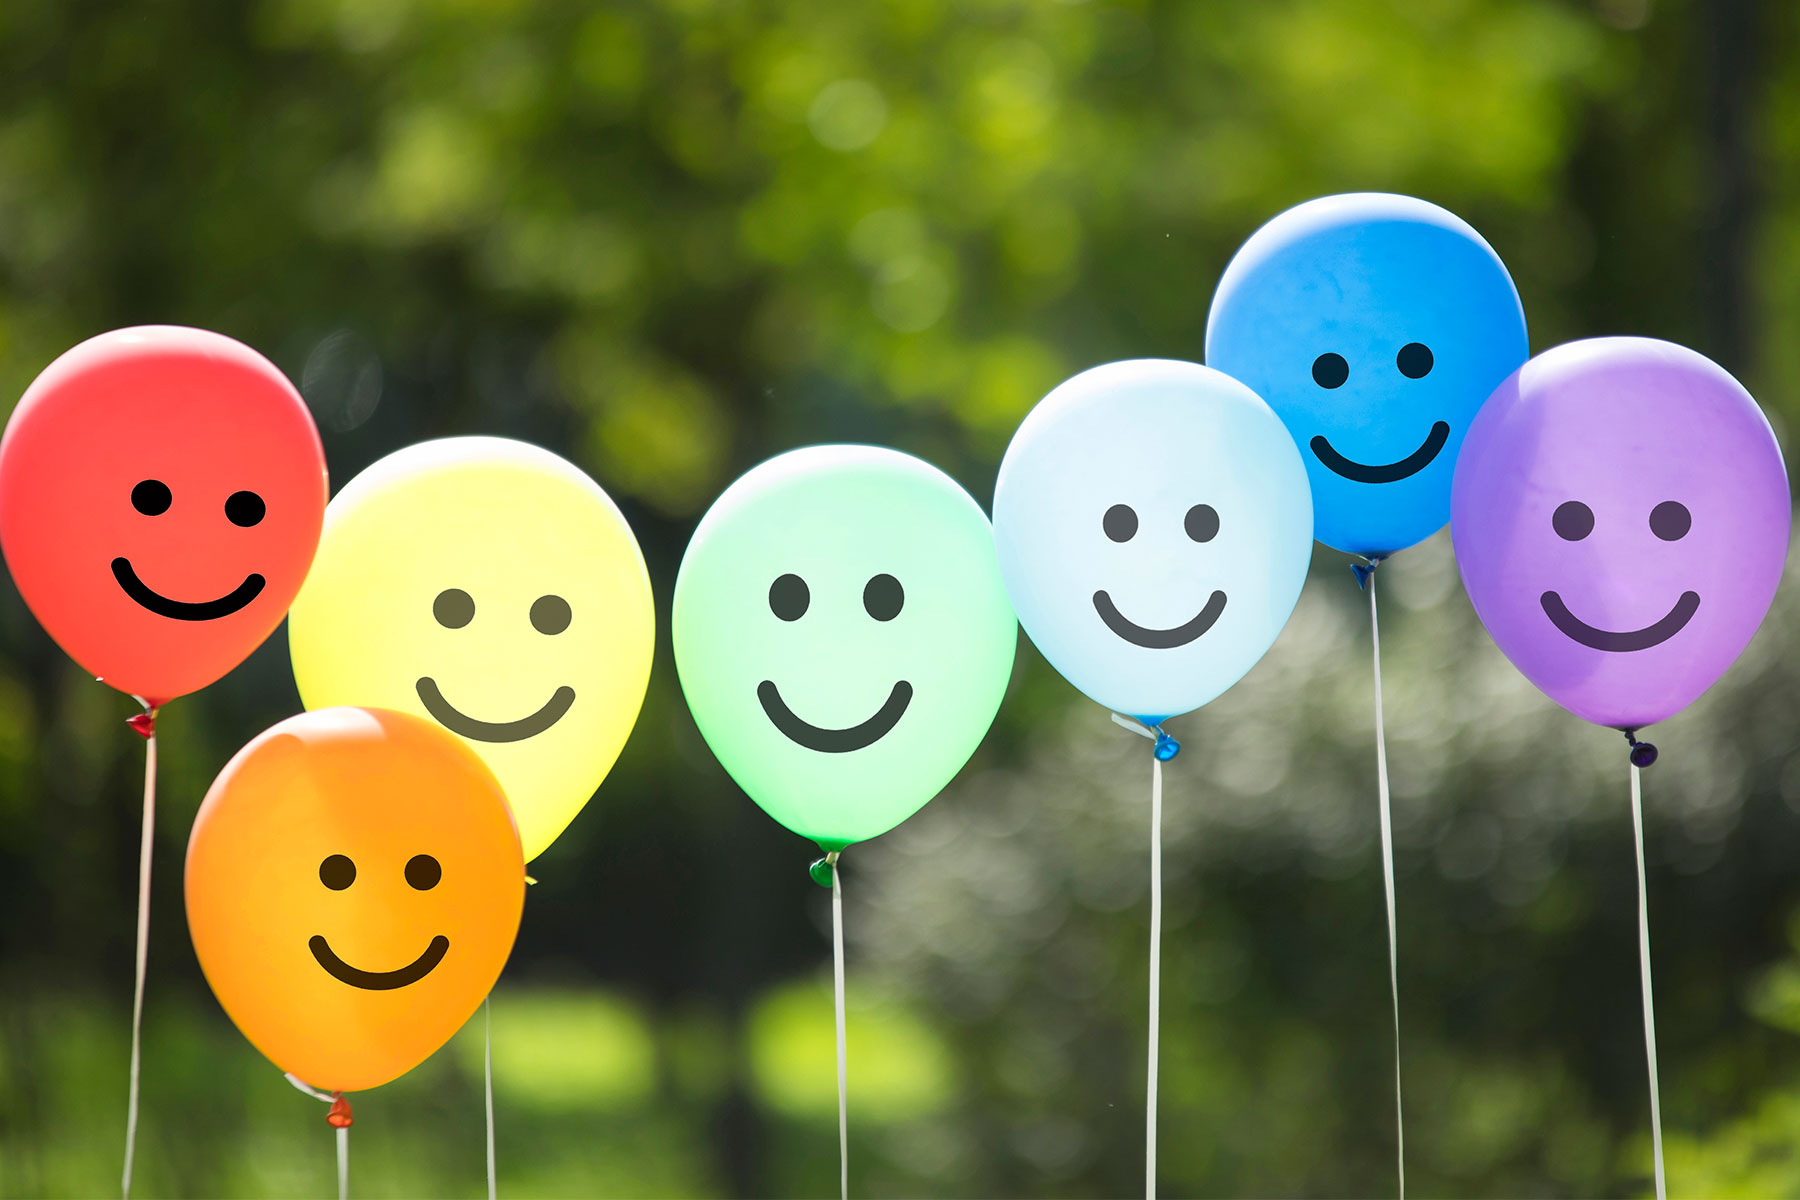 line of balloons with drawn on happiness faces in rainbow colors